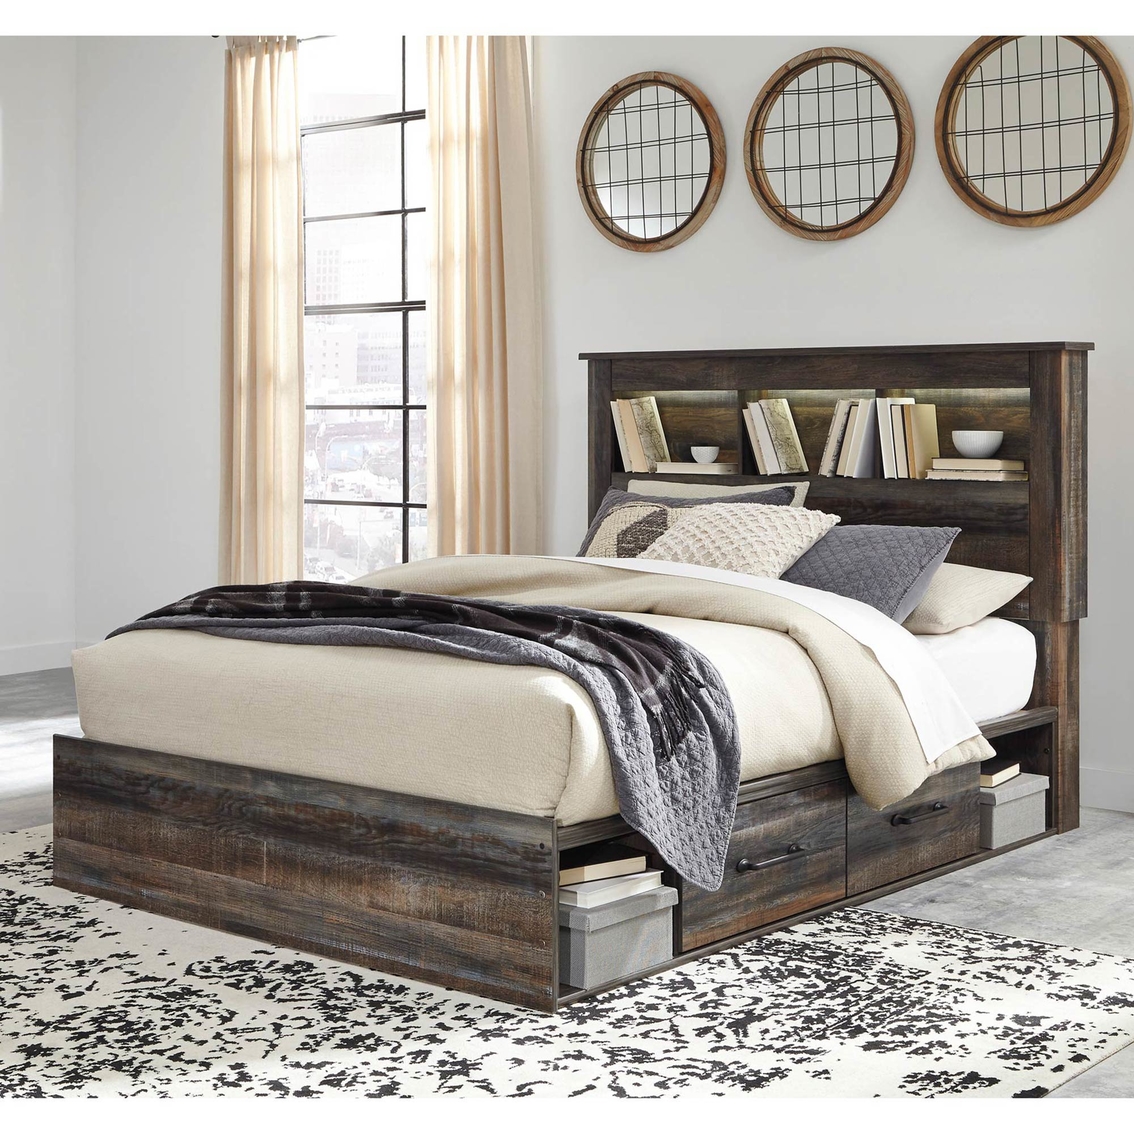 Signature Design by Ashley Drystan Bookcase Headboard Bed with 2 Side Storage Units - Image 2 of 8